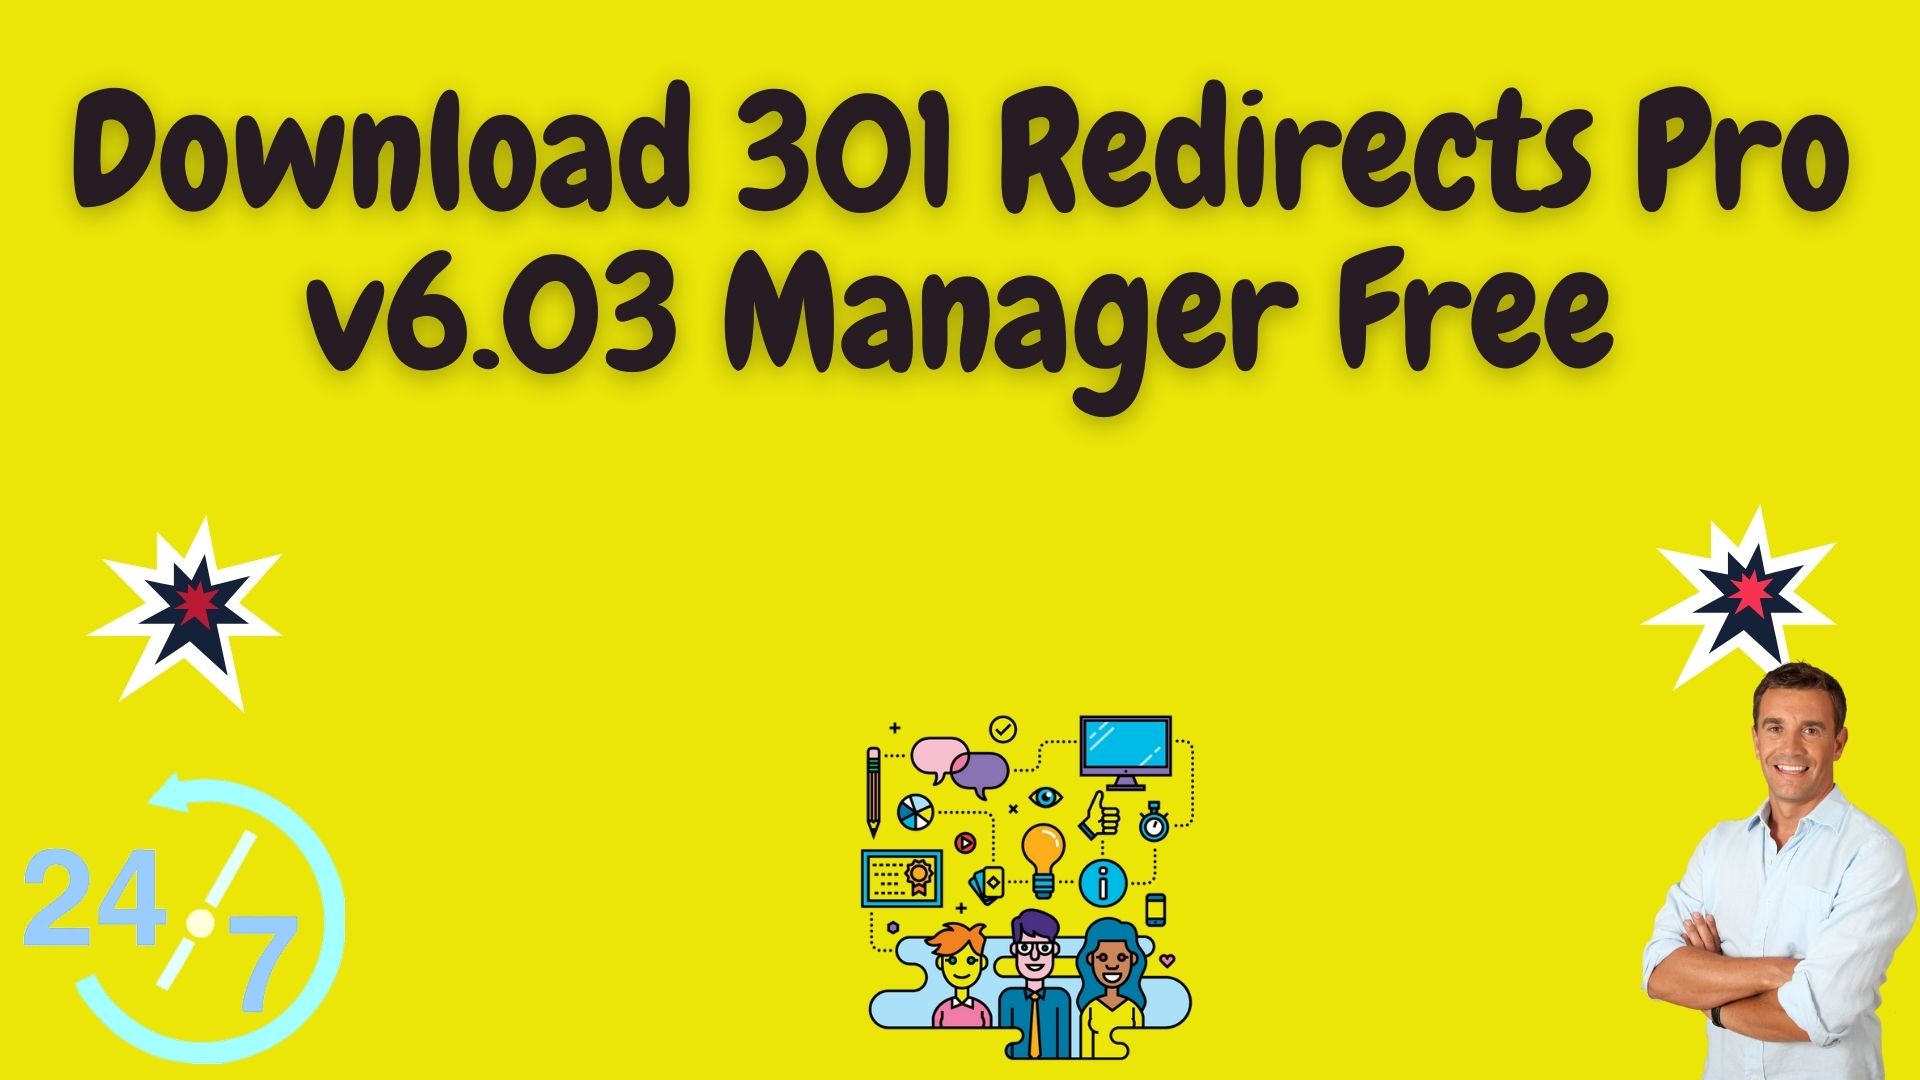 Download 301 Redirects Pro V6.03 Manager Free